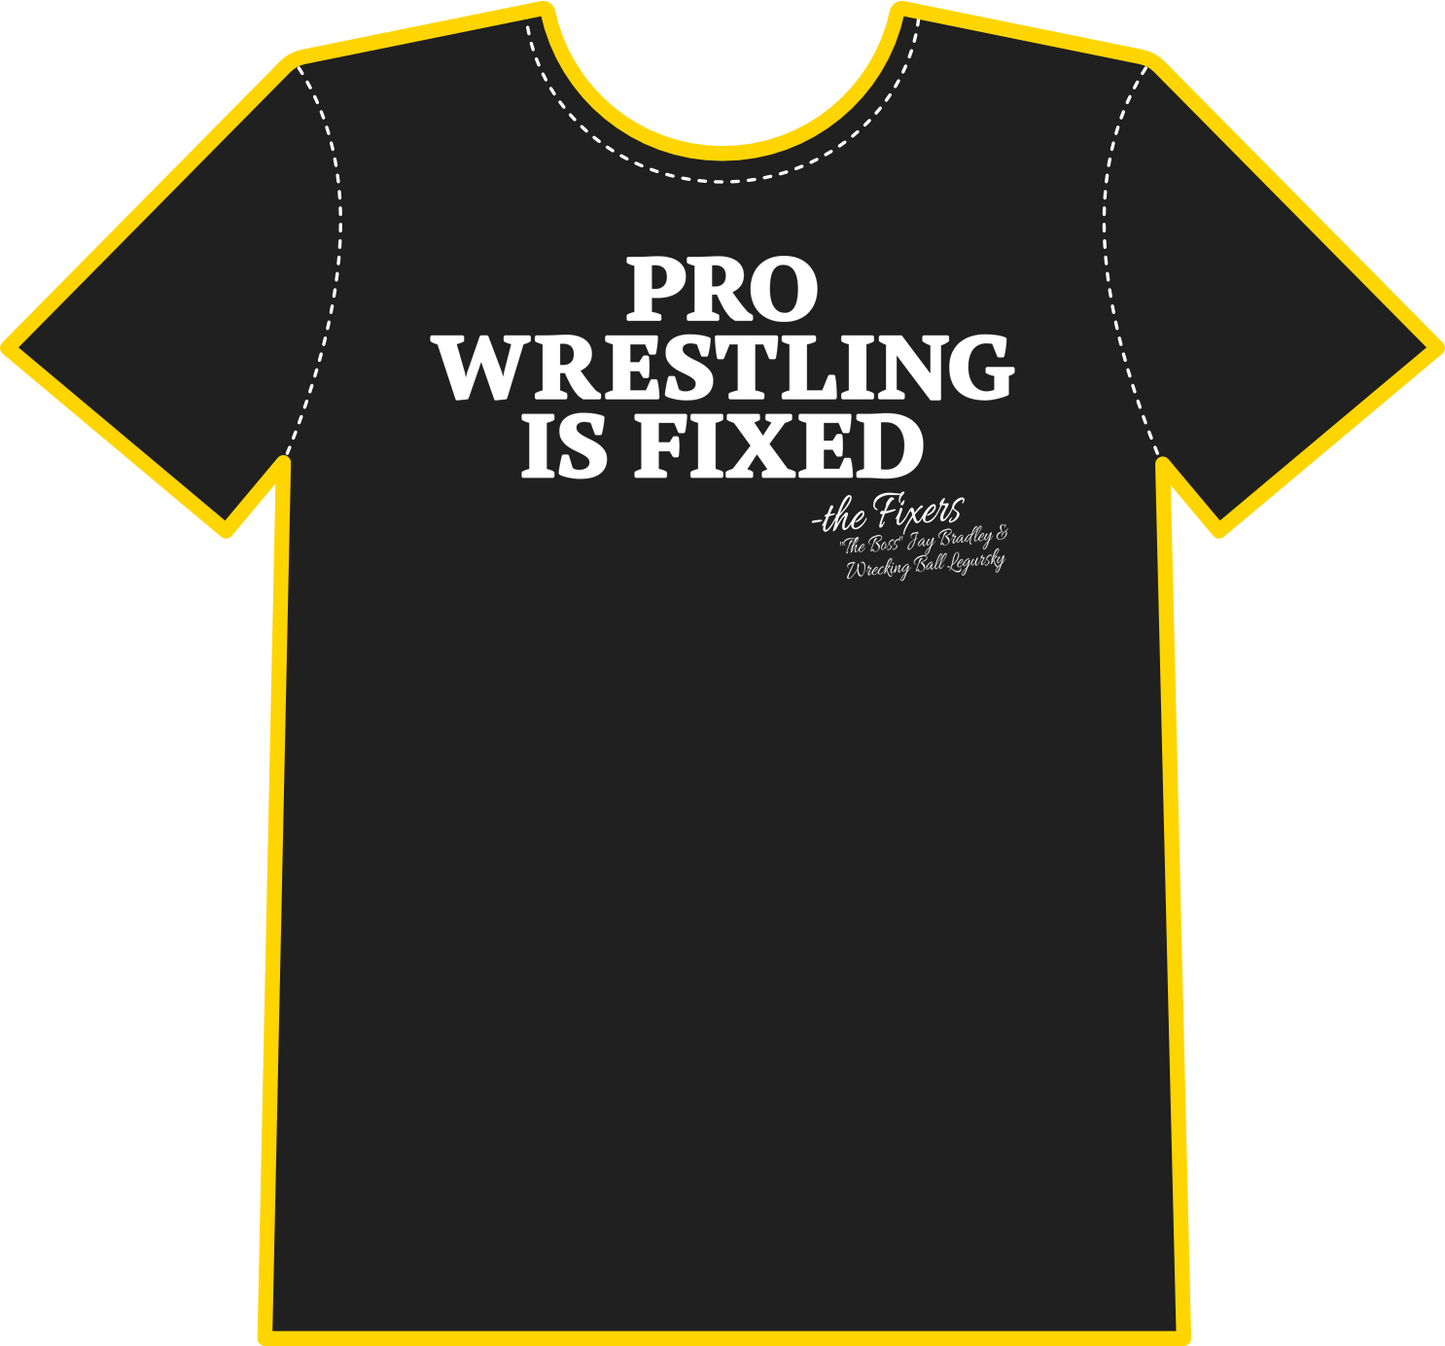 PRO WRESTLING IS FIXED (T-Shirt)